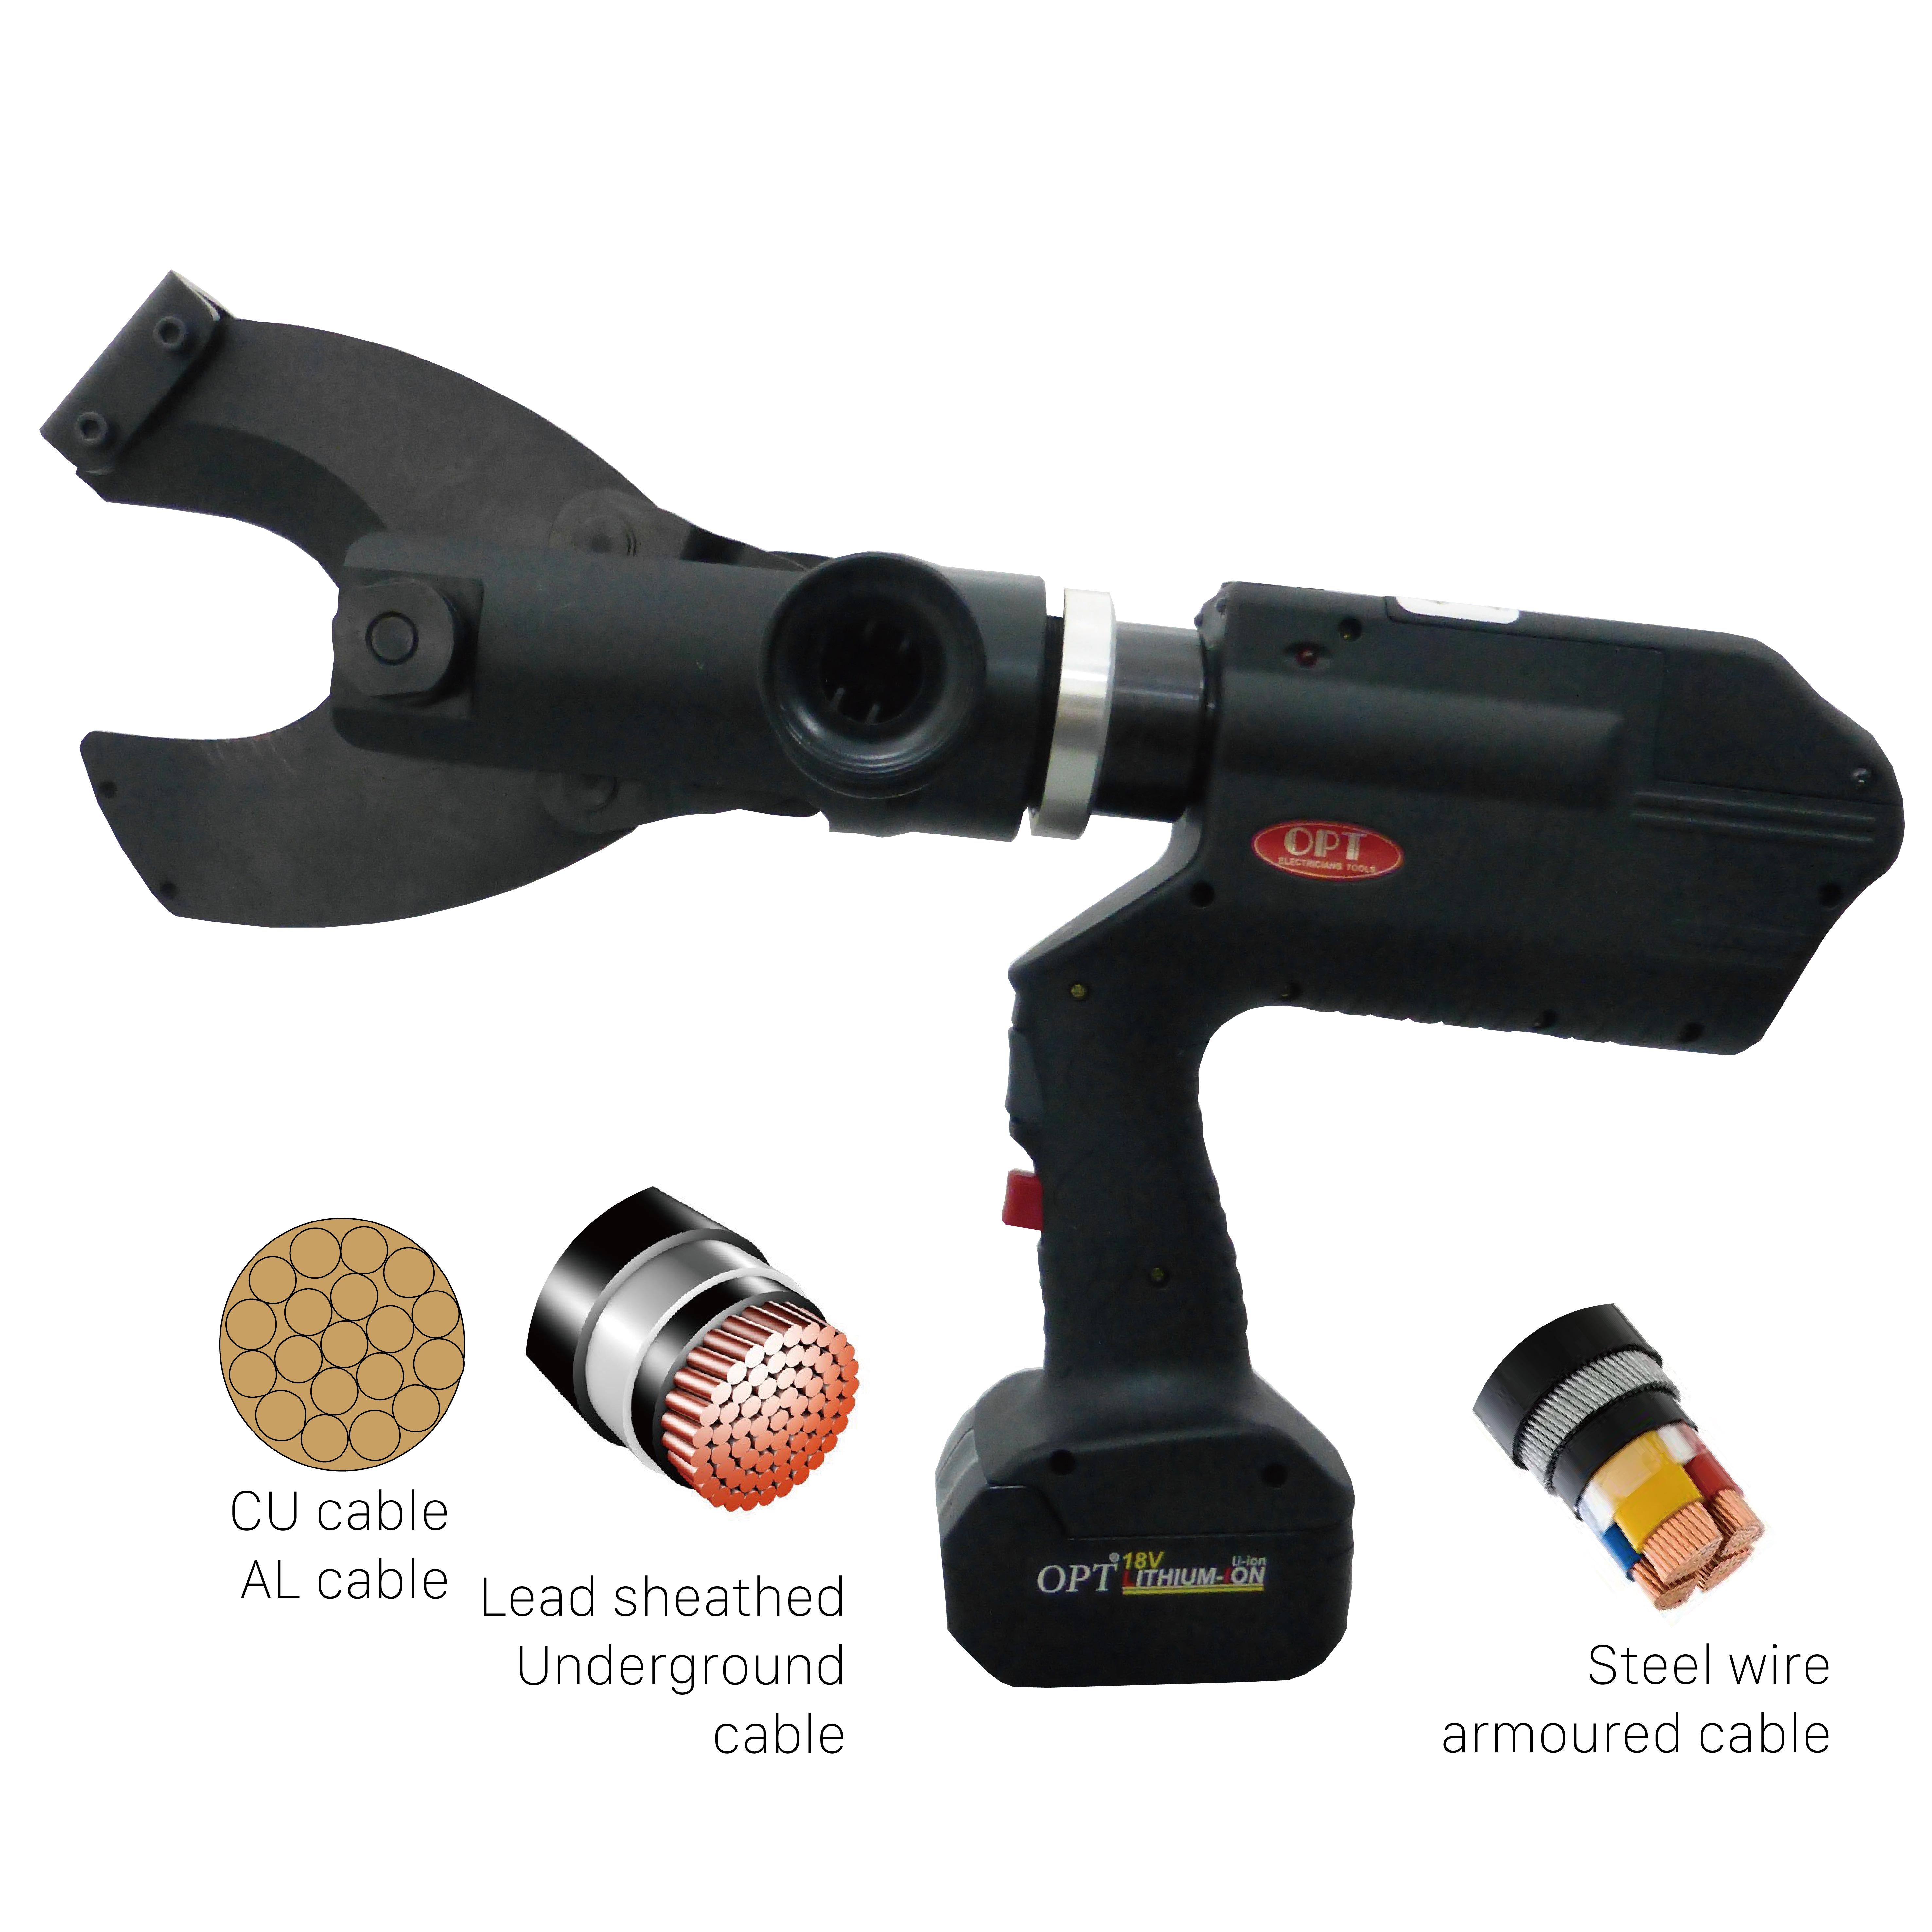 CORDLESS HYDRAULIC CABLE CUTTERS